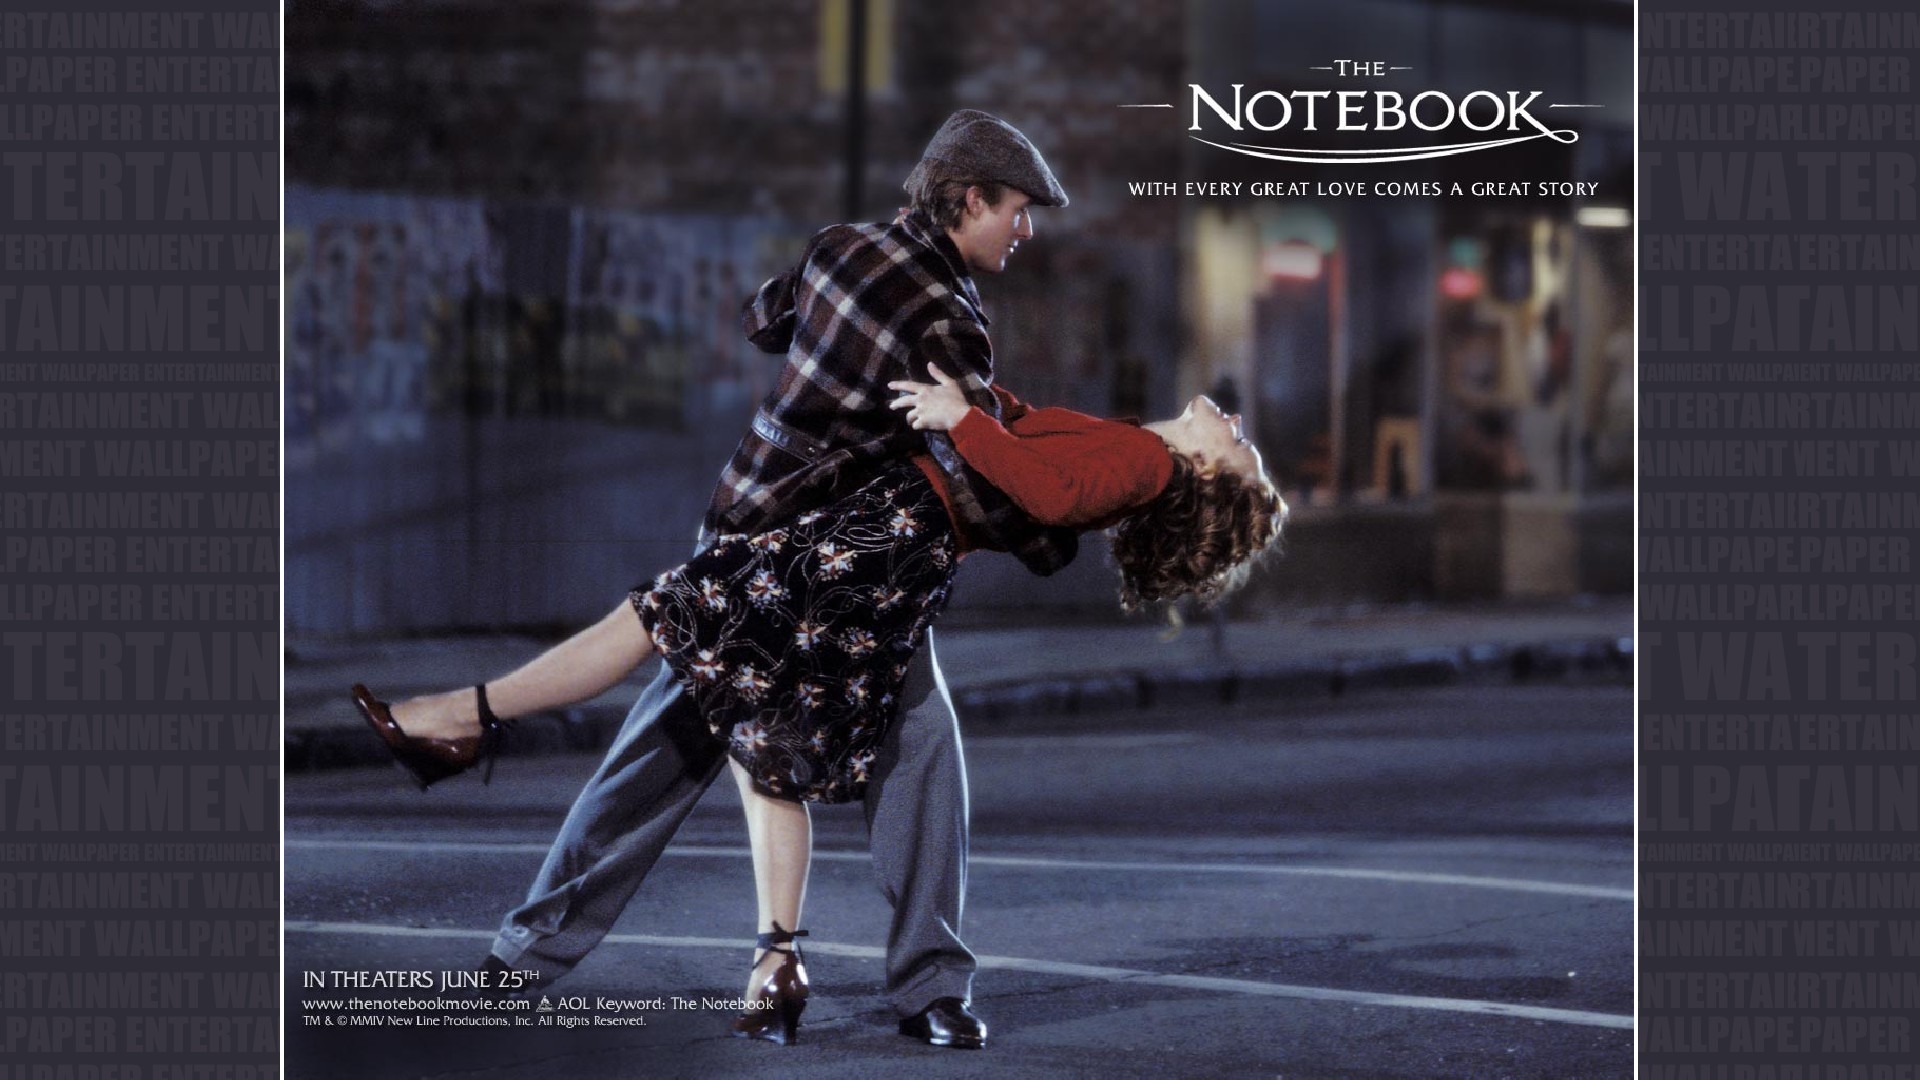 1920x1080 The Notebook Wallpaper - Original size, download now.